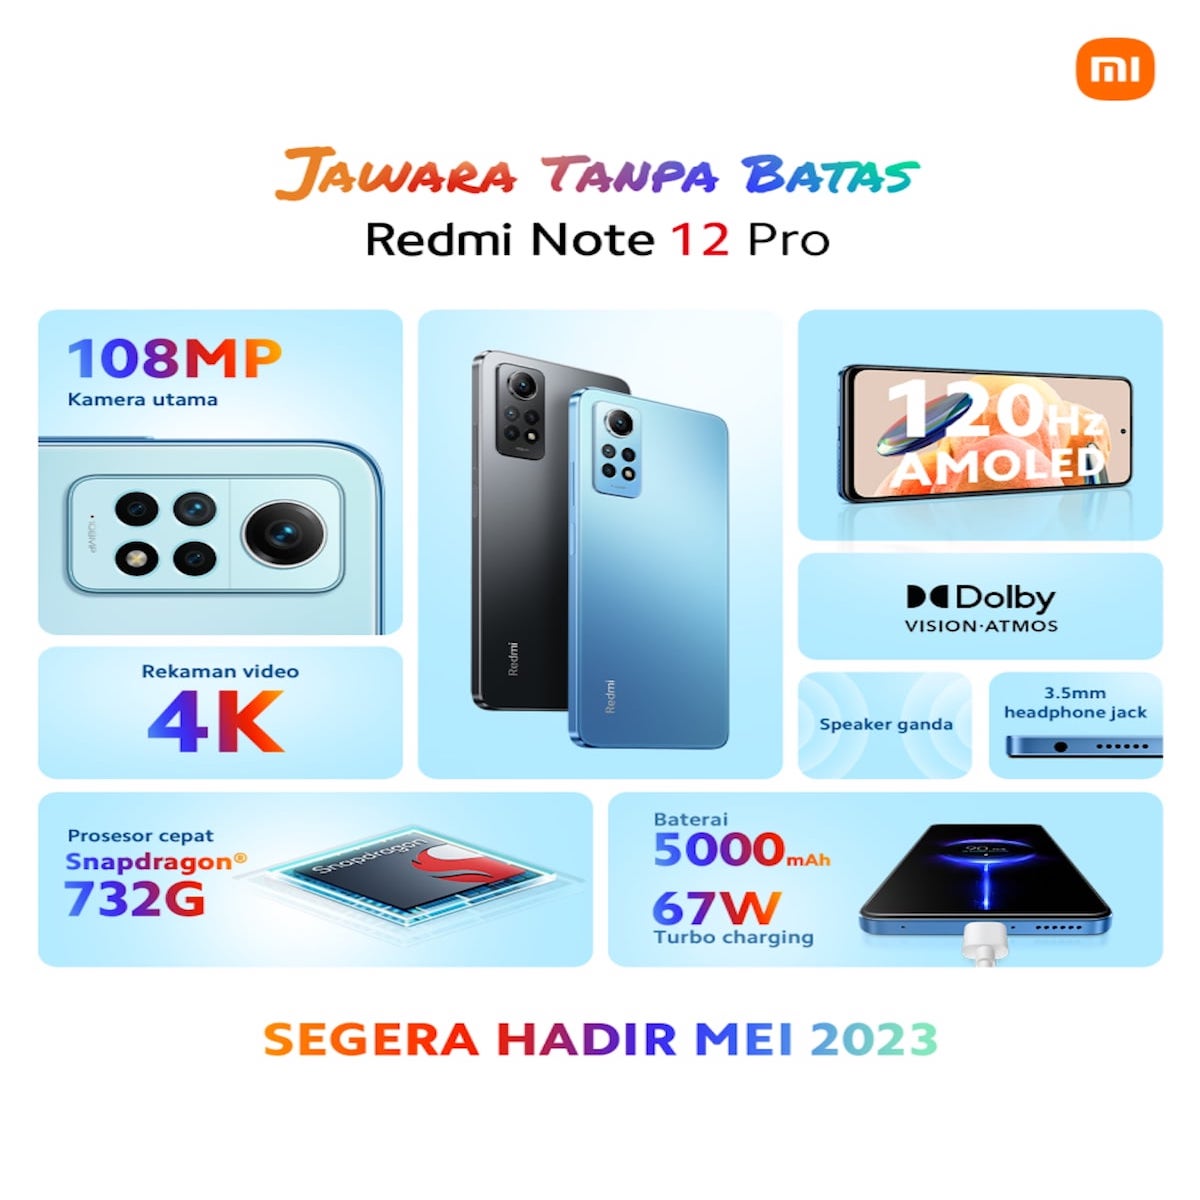 Xiaomi has revealed the specs of its new phone in the Indonesian market. Here is everything you need to know about Redmi Note 12 Pro 4G.